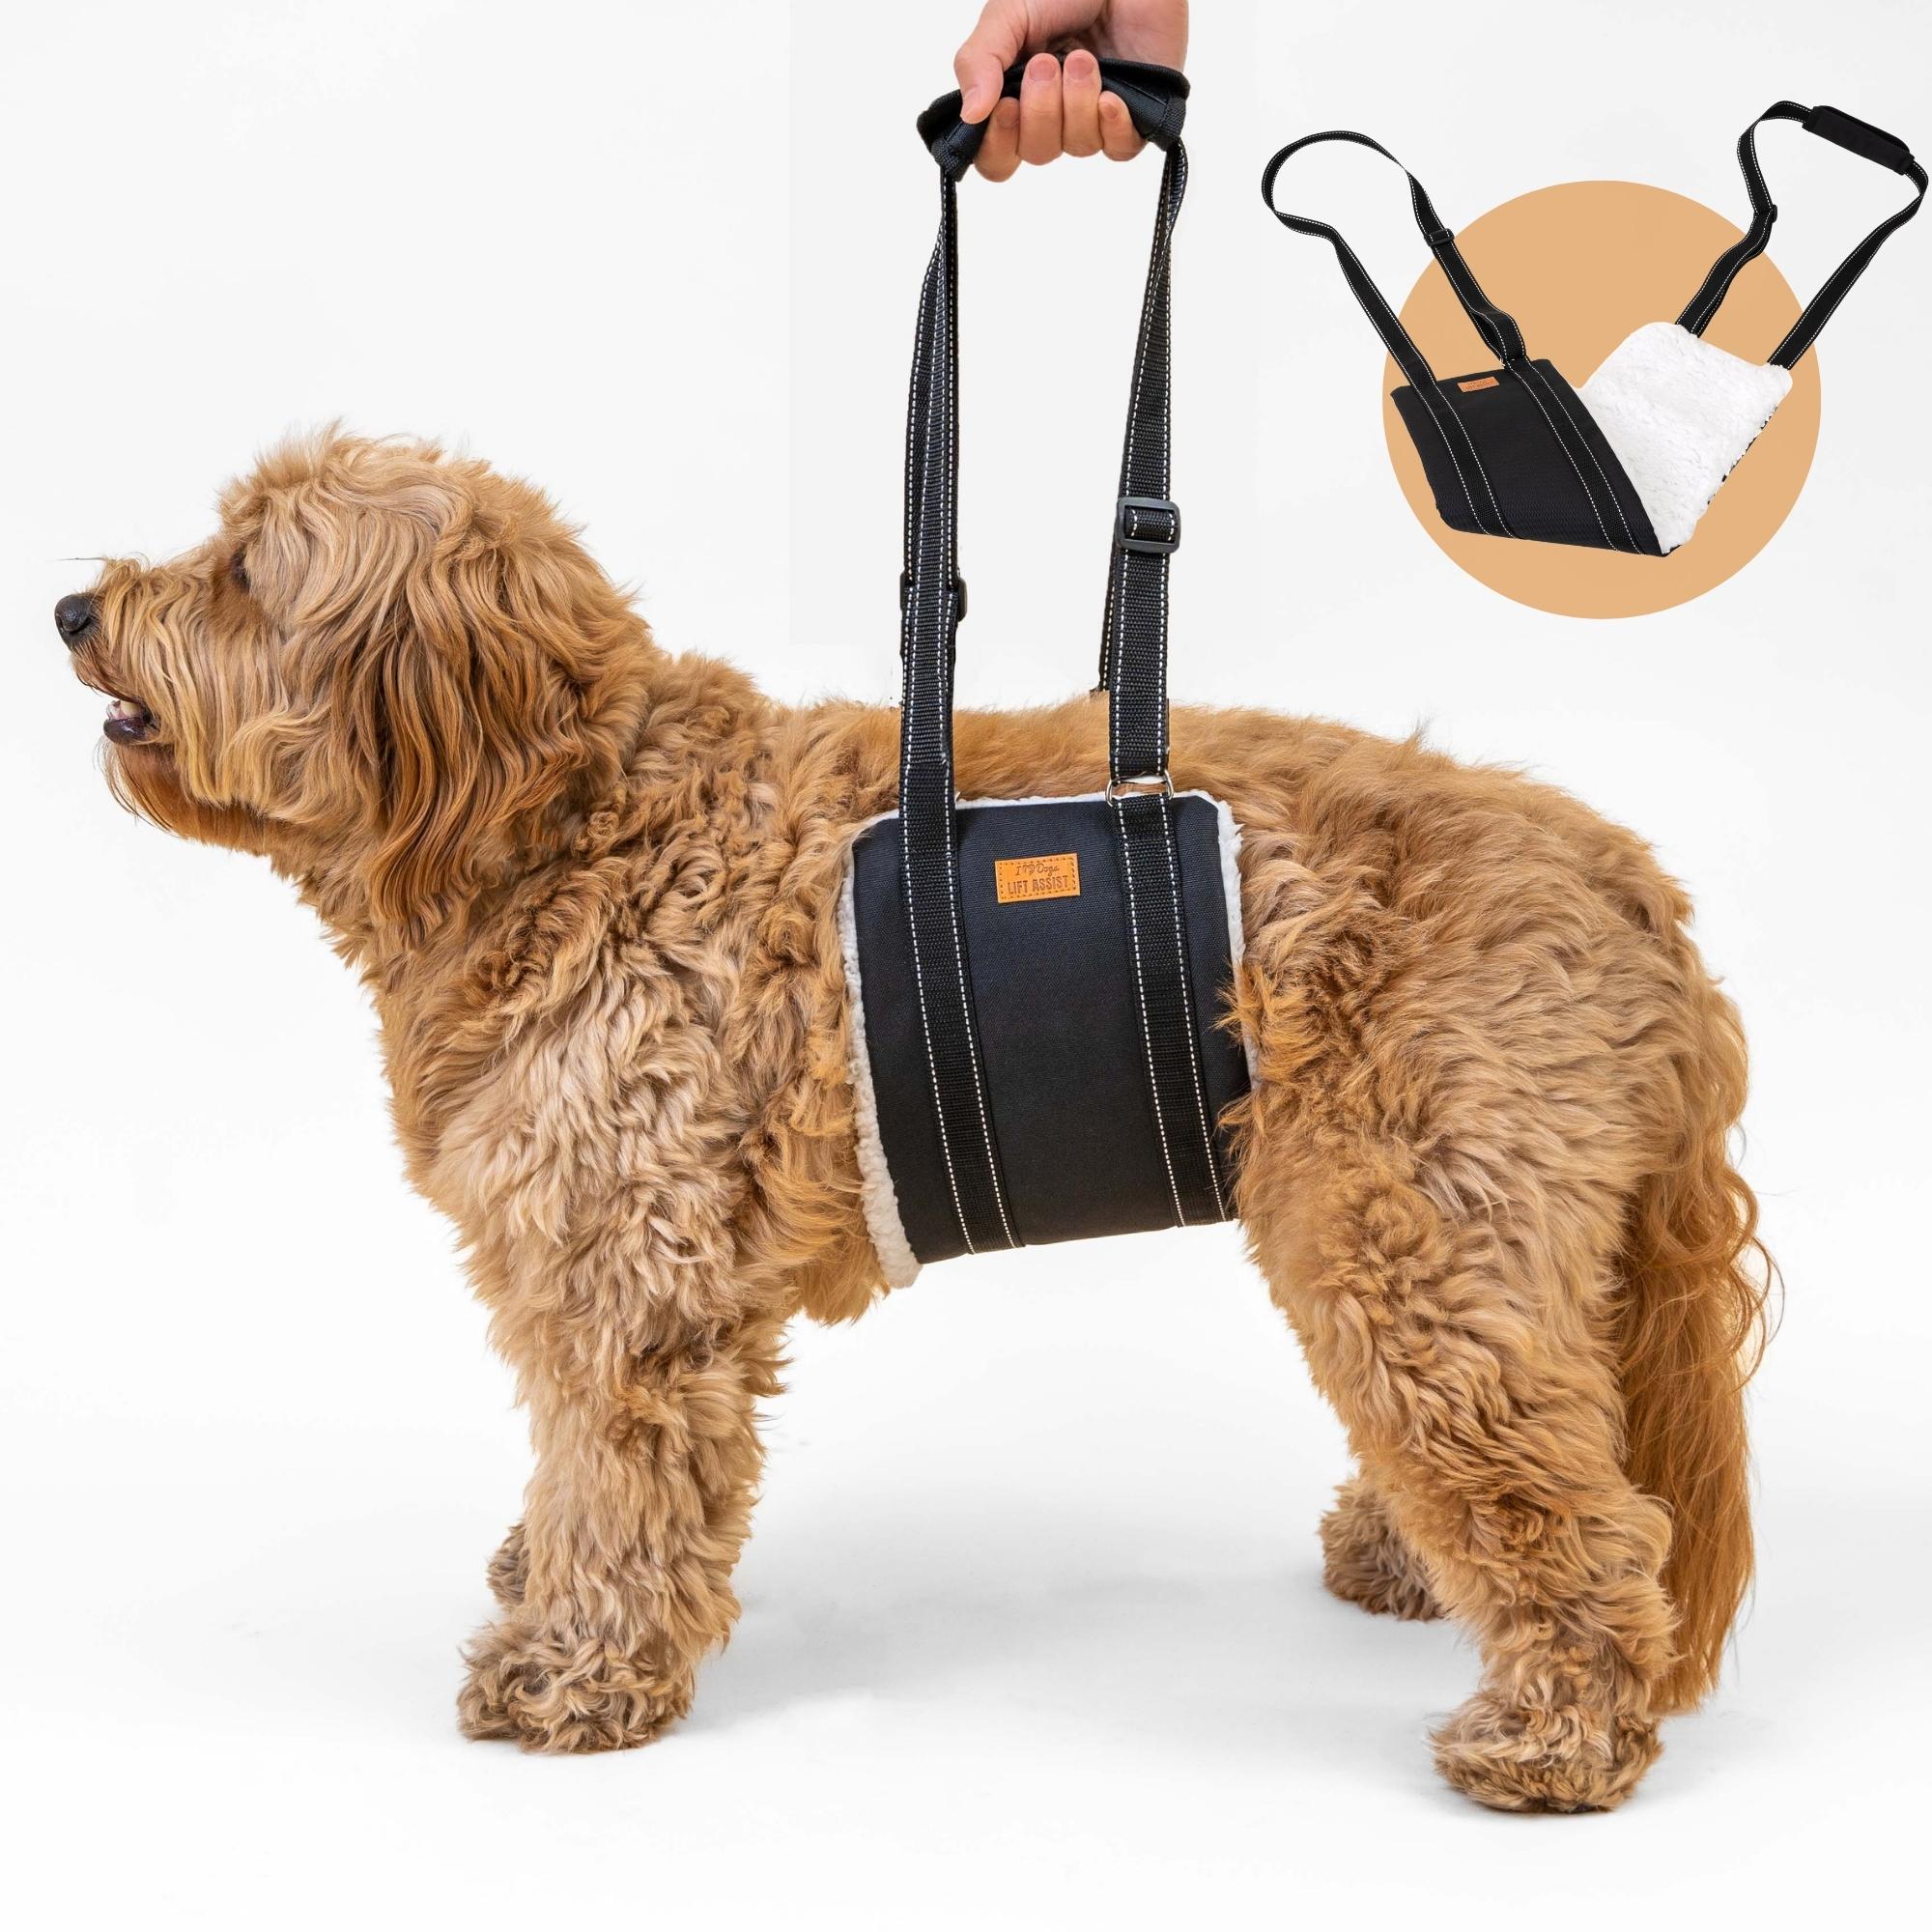 Dog Lift Assist Support Harness - For Senior Dogs, Pet Support & Rehabilitation Sling Lift - Deal 51% OFF!